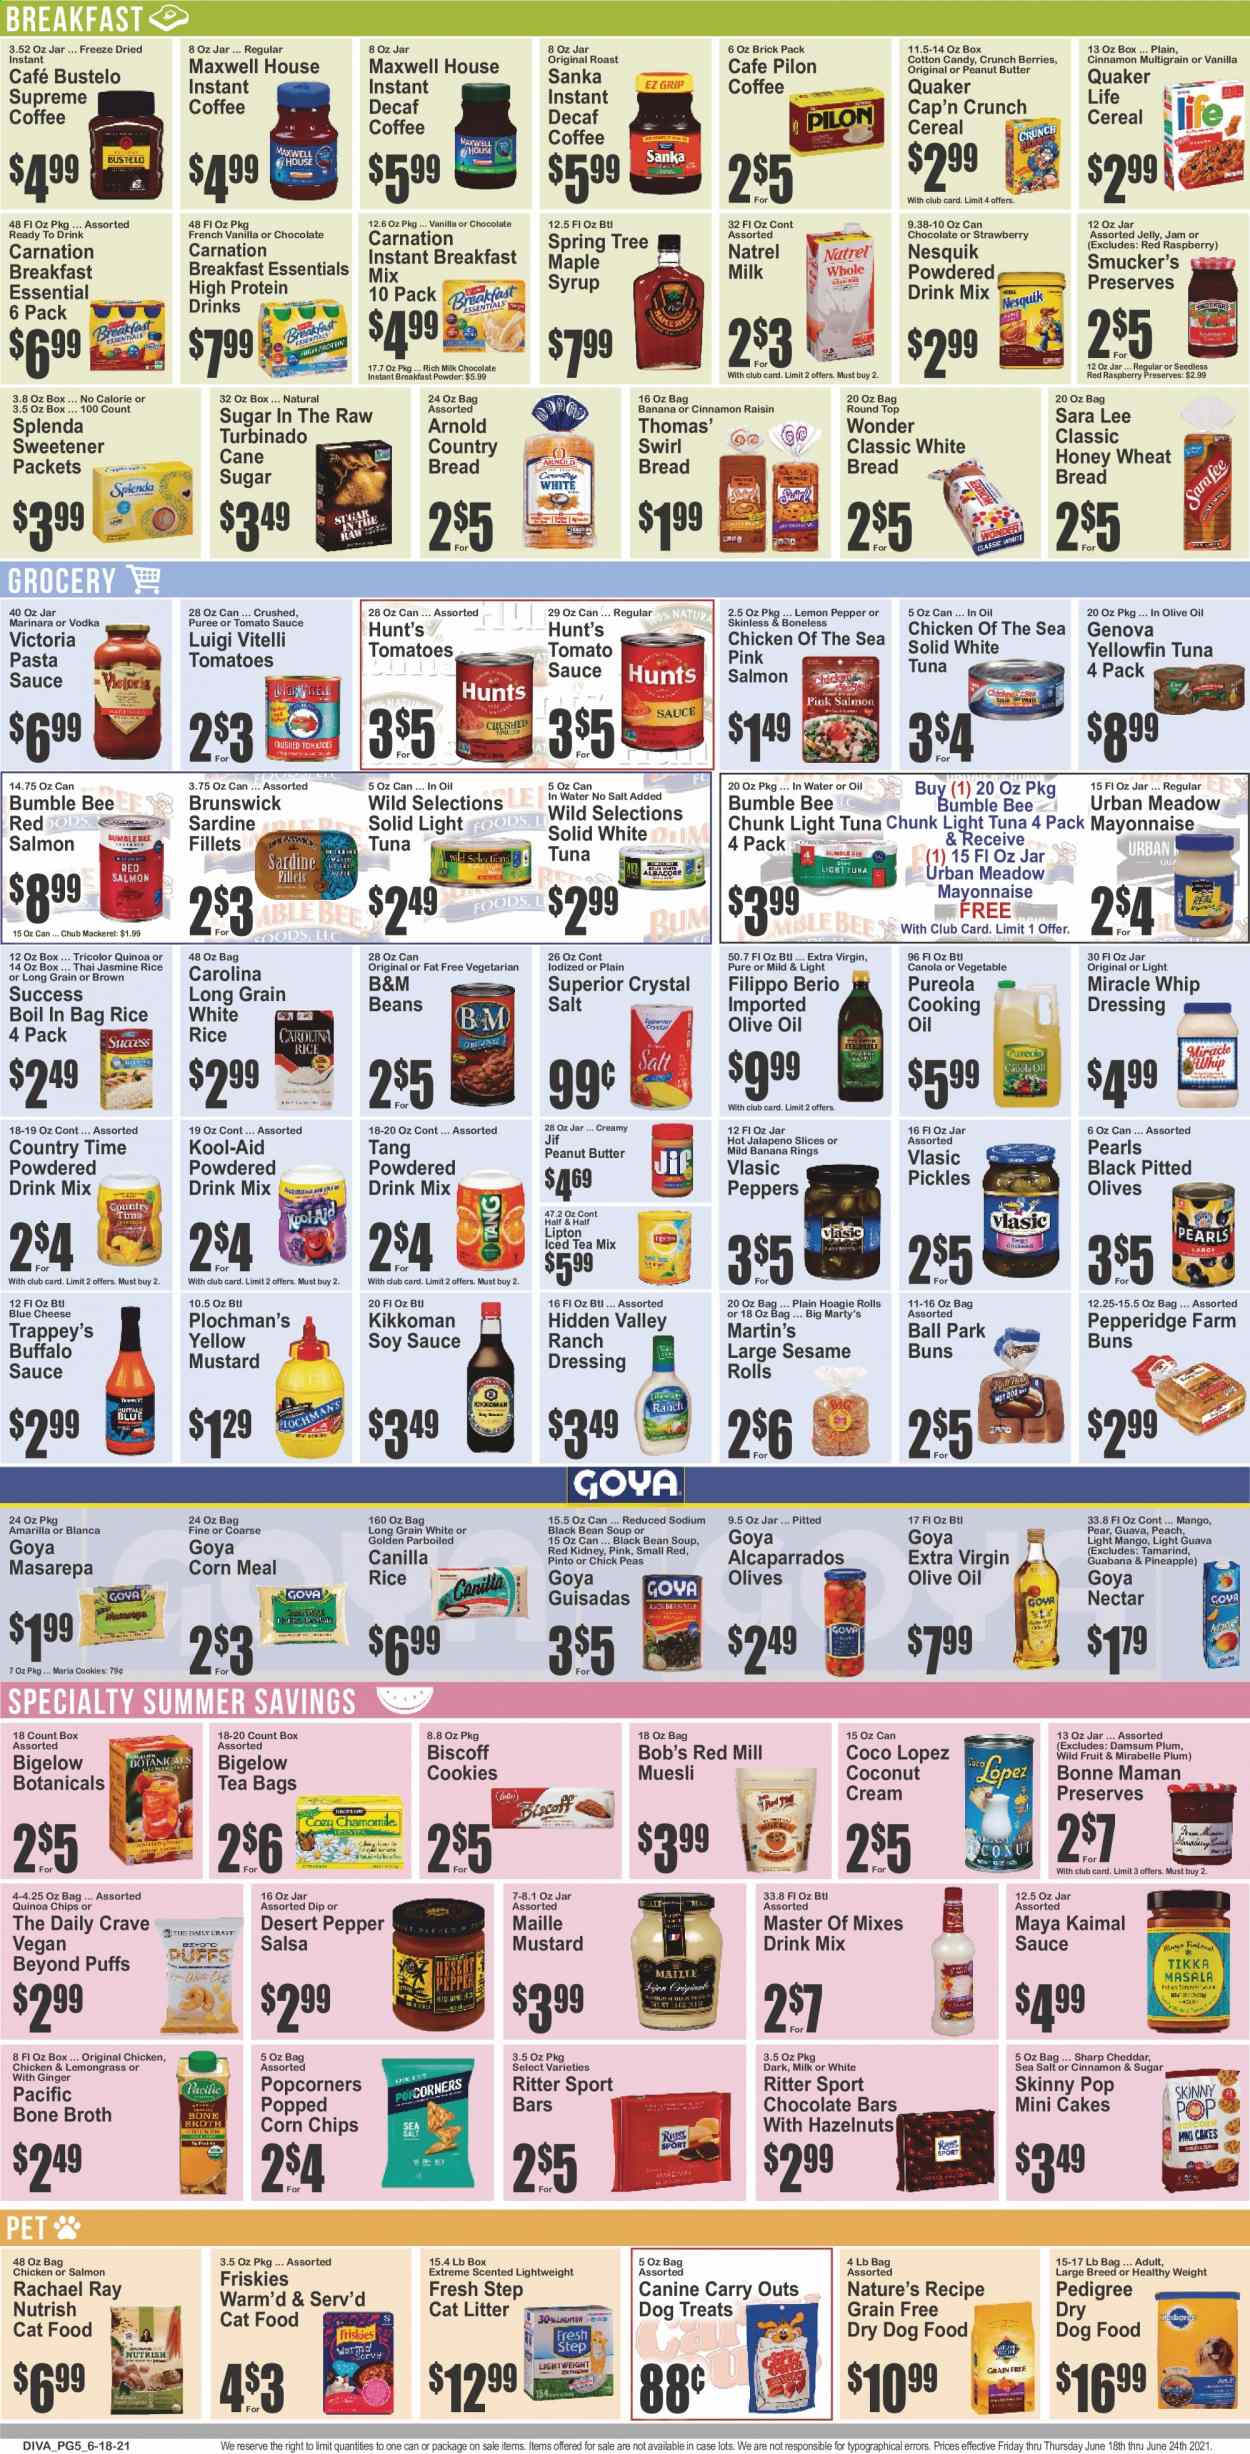 thumbnail - Key Food Flyer - 06/18/2021 - 06/24/2021 - Sales products - bread, wheat bread, white bread, cake, buns, Sara Lee, Ace, sandwich rolls, puffs, ginger, jalapeño, pasta sauce, soup, Bumble Bee, sauce, Quaker, Tikka Masala, cheese, Nesquik, protein drink, coconut cream, mayonnaise, Miracle Whip, ranch dressing, cookies, milk chocolate, cotton candy, Ritter Sport, chocolate bar, bars, corn chips, Skinny Pop, salty snack, cane sugar, broth, tamarind, sweetener, corn meal, canned tomatoes, canned tuna, tomato sauce, pickles, light tuna, Chicken of the Sea, Goya, canned fish, pickled vegetables, cereals, muesli, Cap'n Crunch, quinoa, chickpeas, jasmine rice, white rice, mustard, soy sauce, Kikkoman, salsa, extra virgin olive oil, olive oil, cooking oil, maple syrup, syrup, Jif, jam, Lipton, Country Time, powder drink, Maxwell House, tea bags, coffee, instant coffee, alcohol, vodka, Half and half, cat litter, animal food, animal treats, cat food, dog food, Pedigree, dry dog food, Friskies, Fresh Step, Nutrish, dog treat, carnation. Page 5.